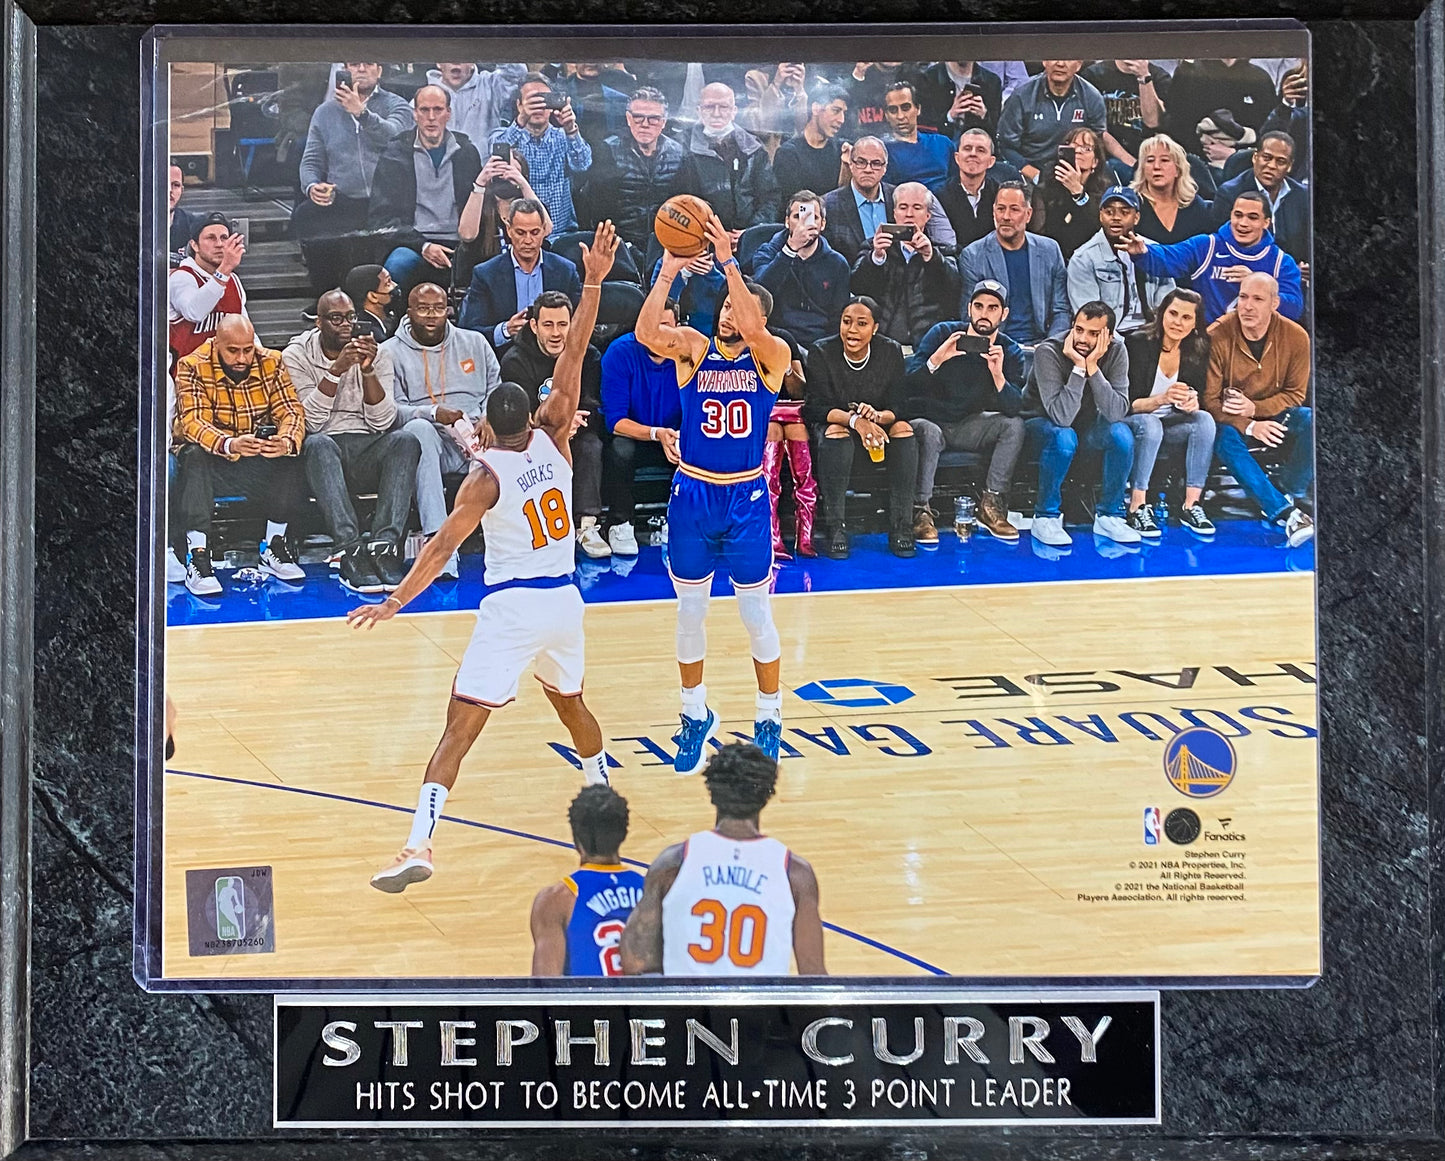 Stephen Curry Hits Shot to Become All Time 3 Point Leader Wall Plaque